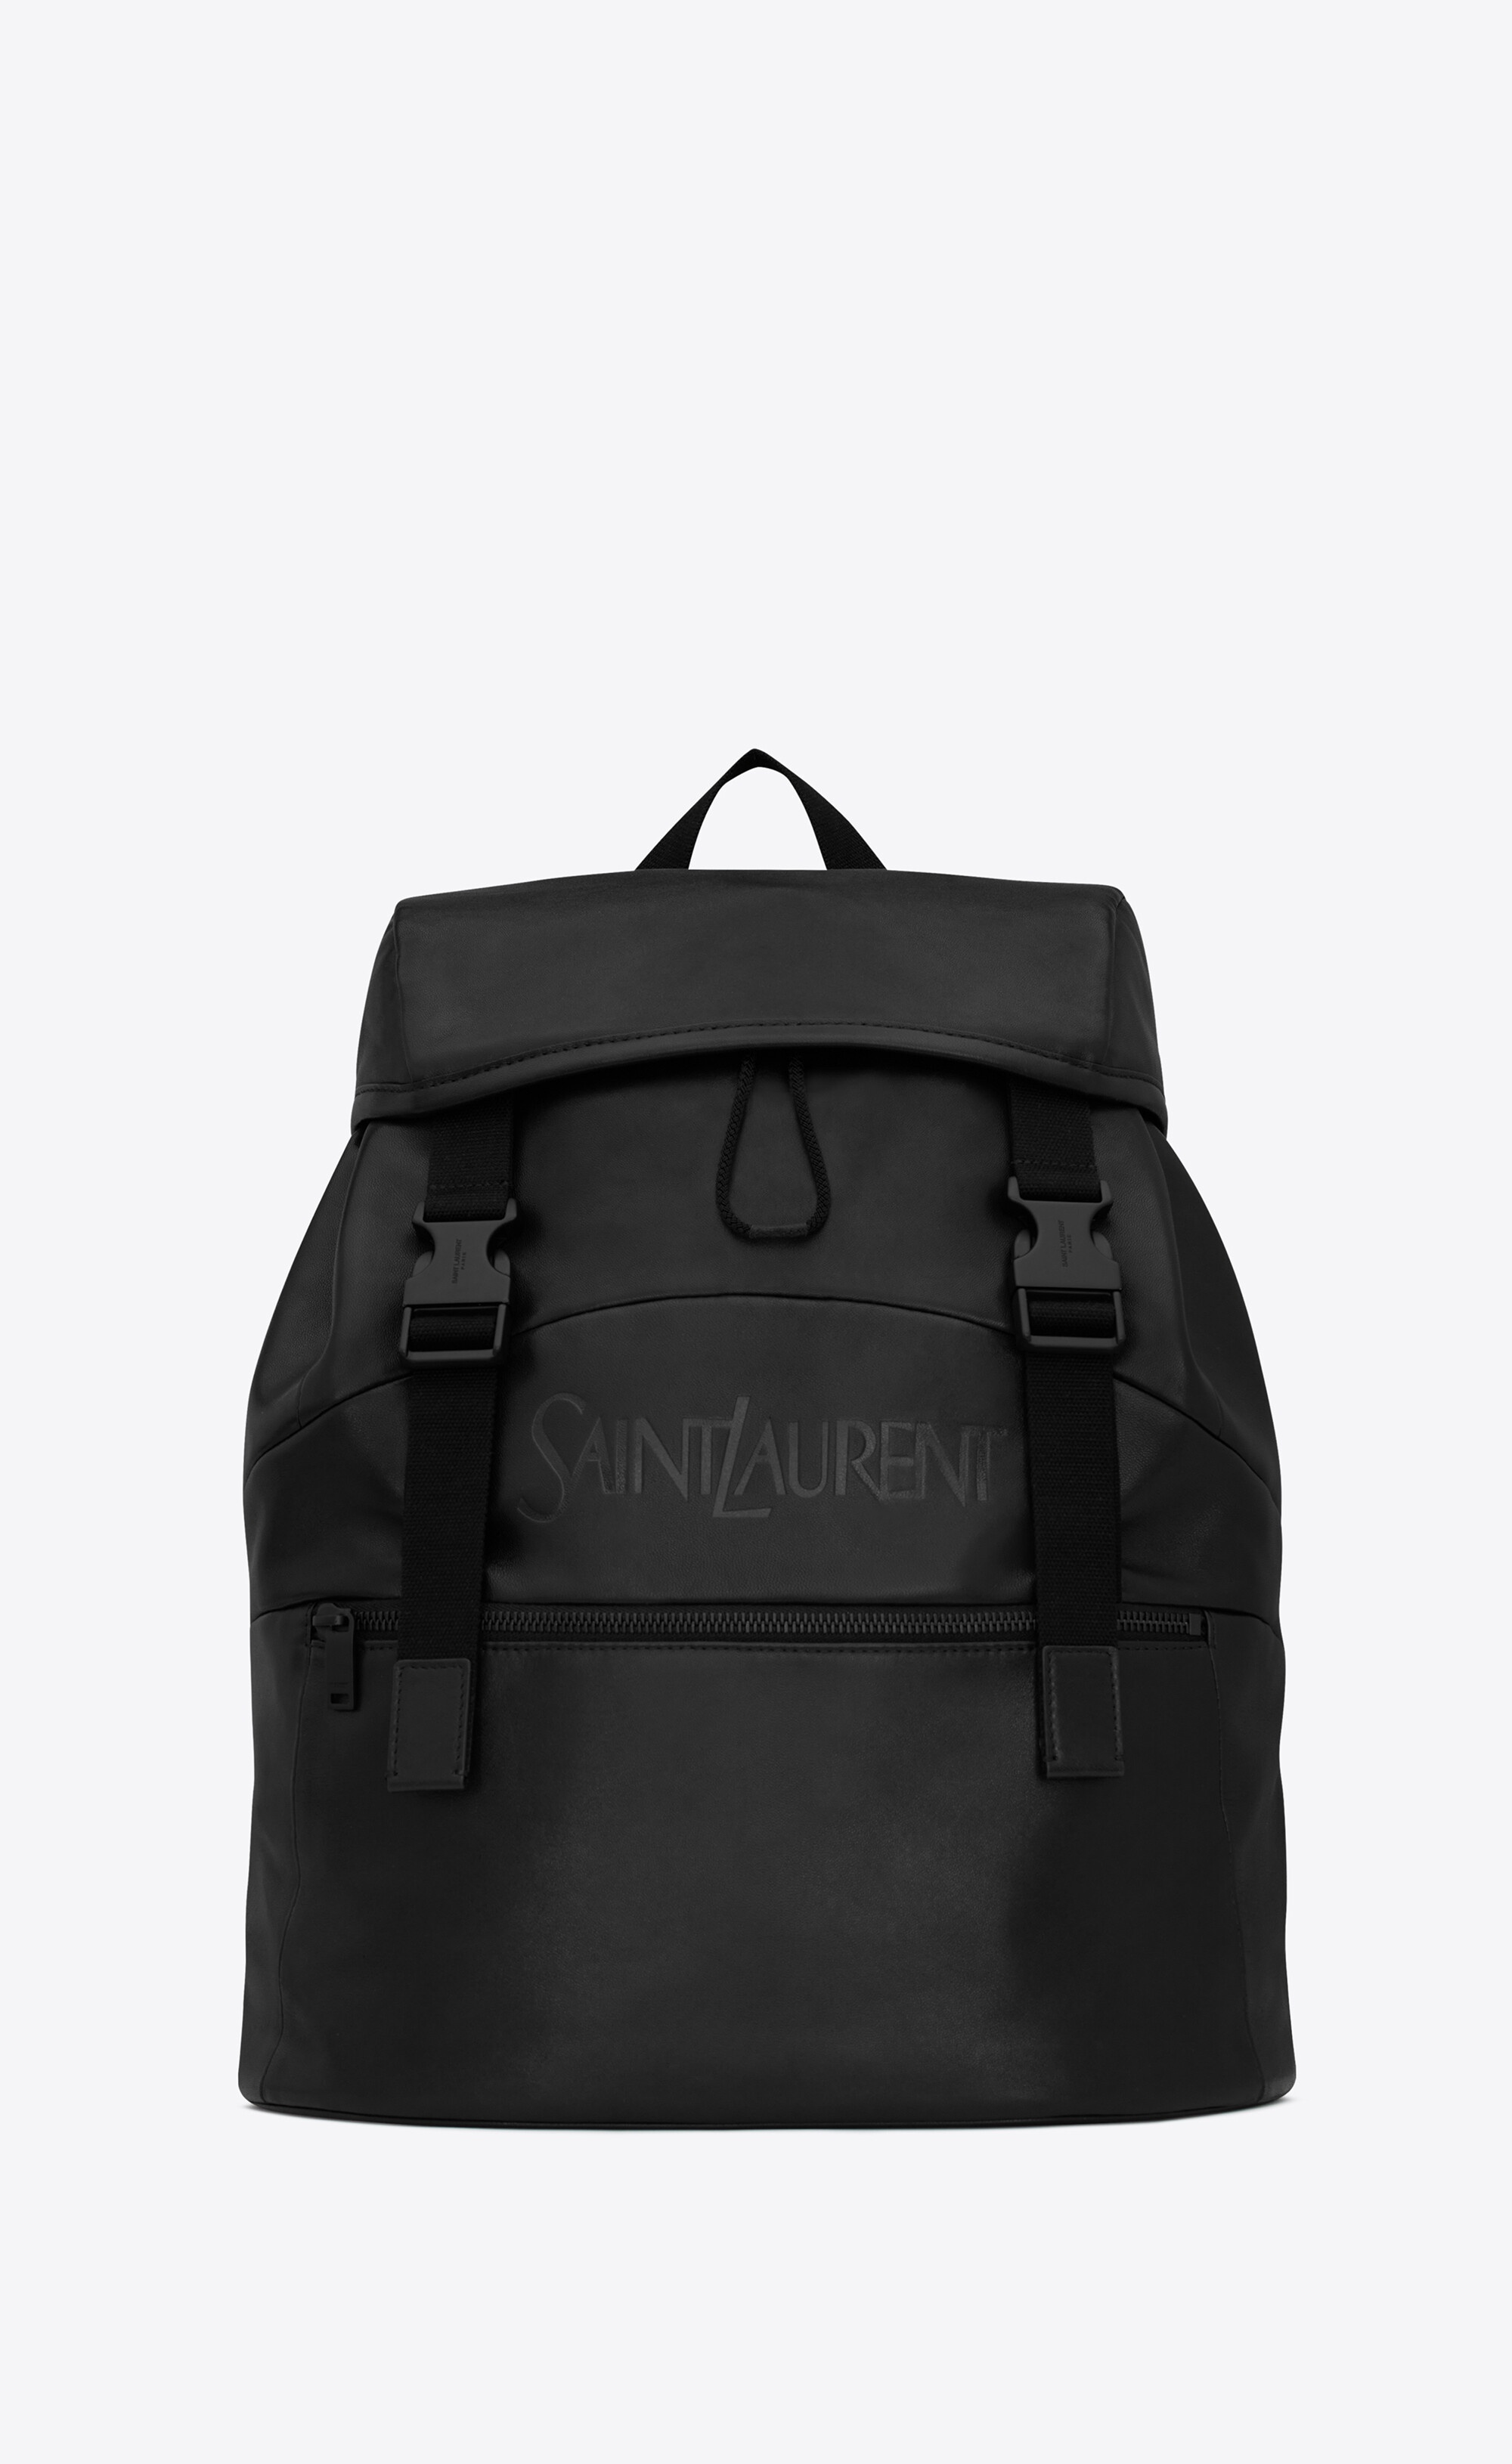 saint laurent backpack in grained leather - 1